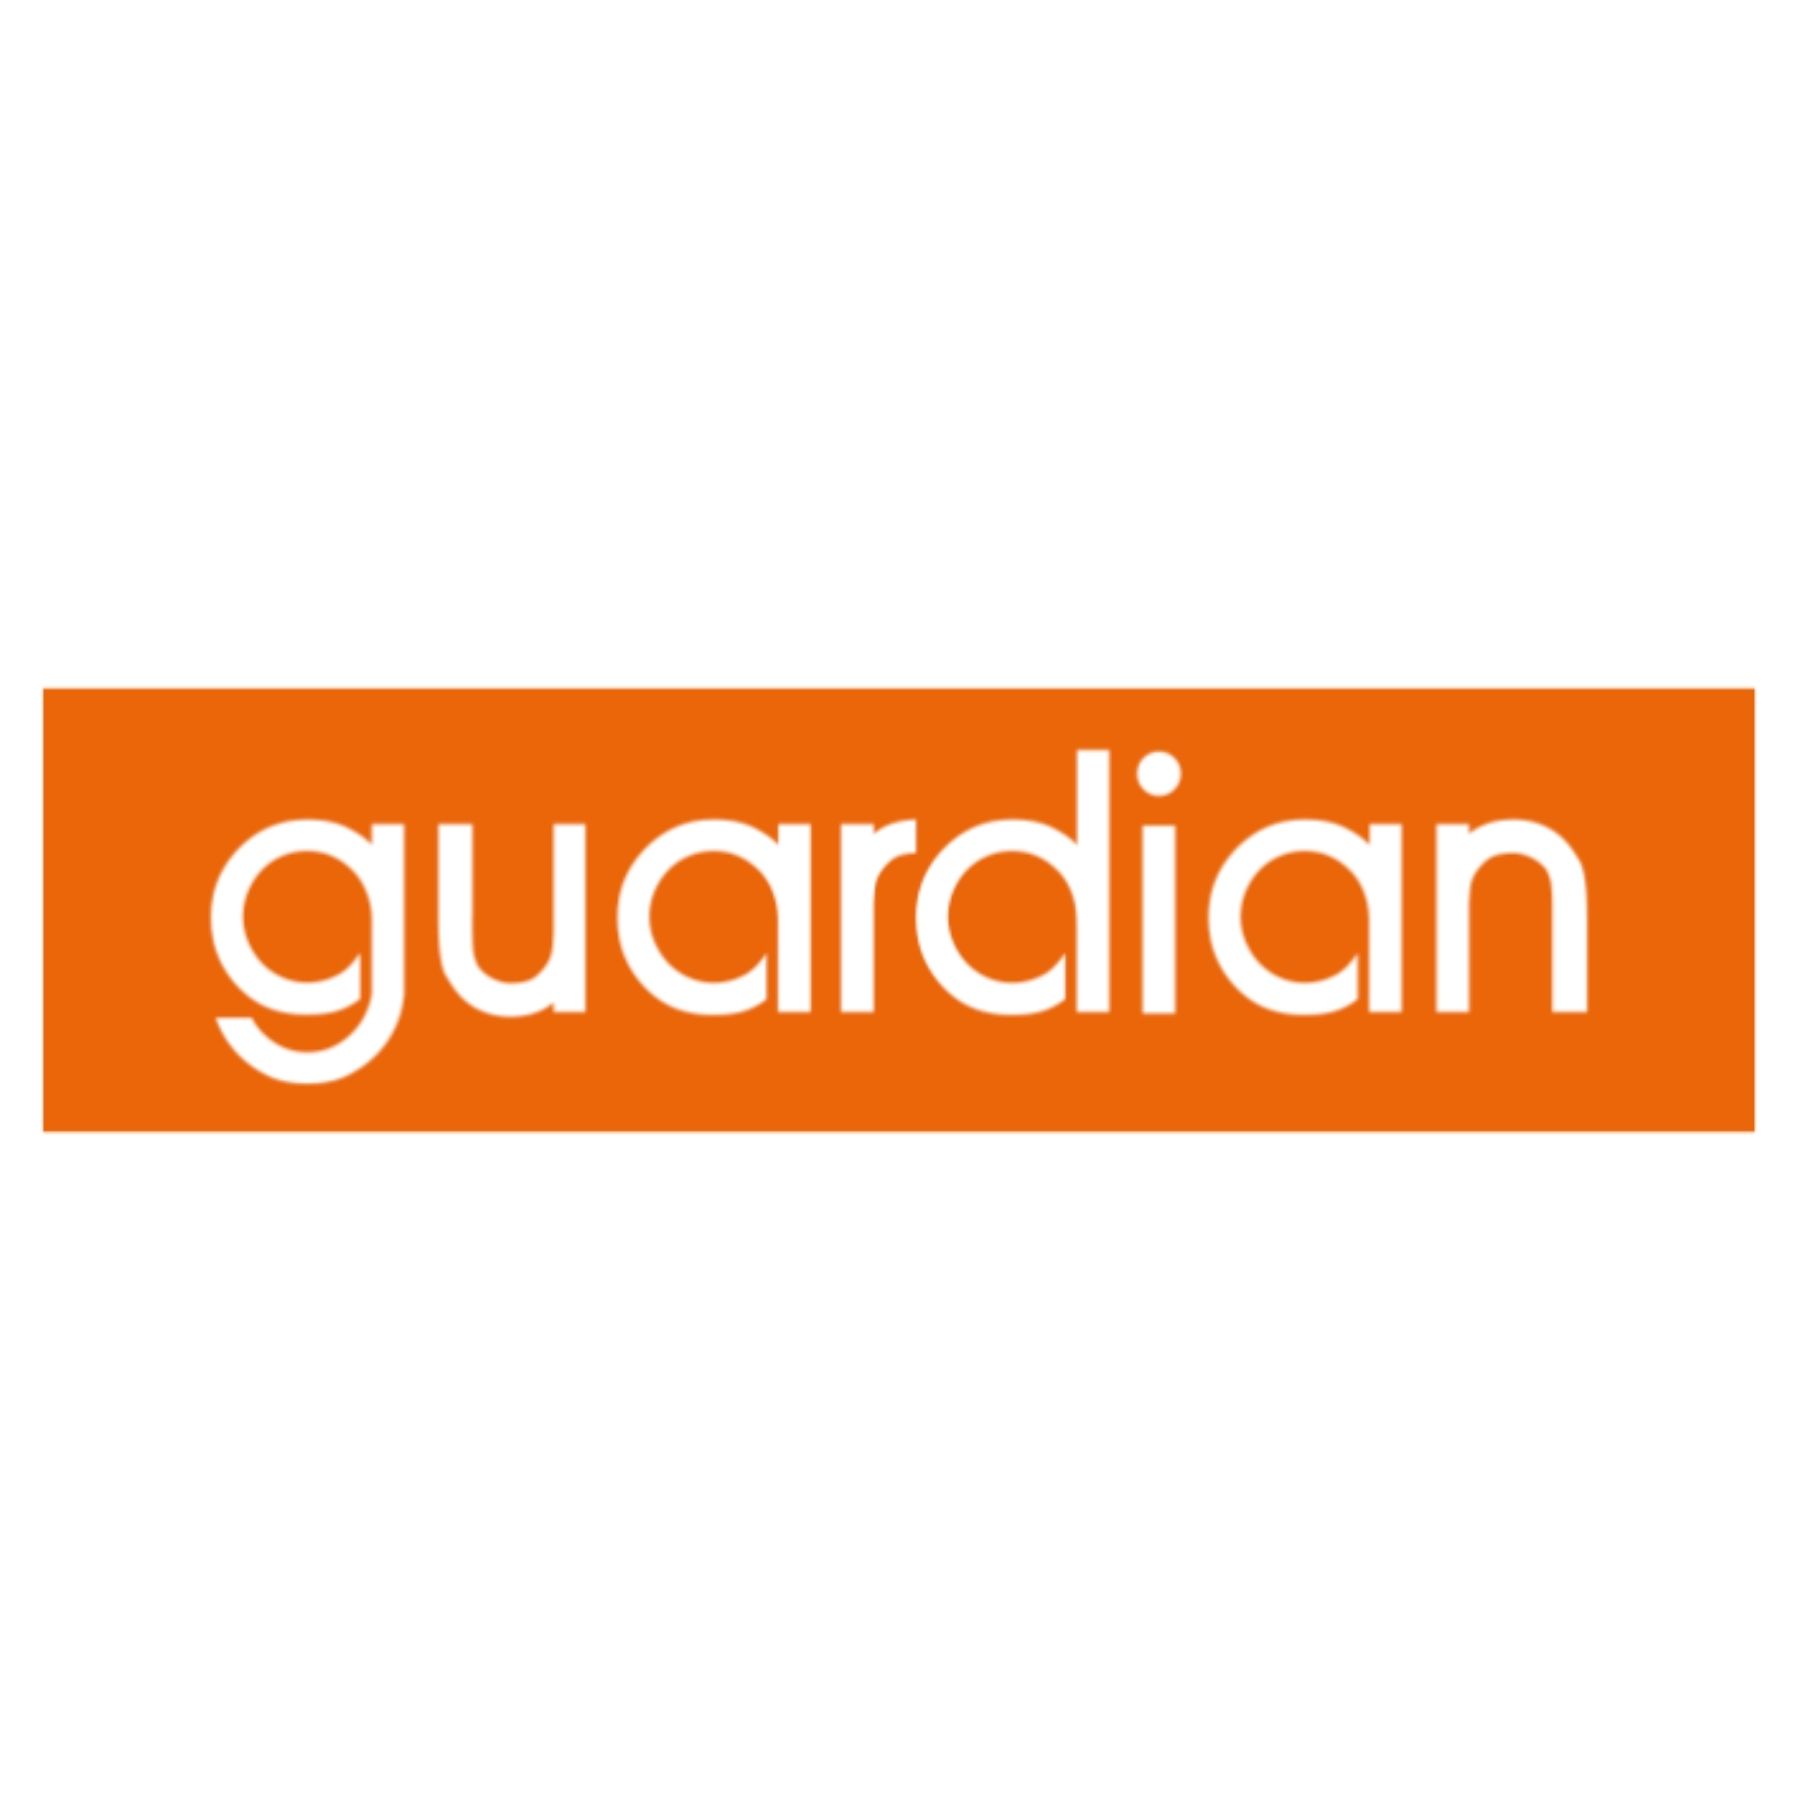 The Guardian confirms ransomware attack on its IT Infrastructure